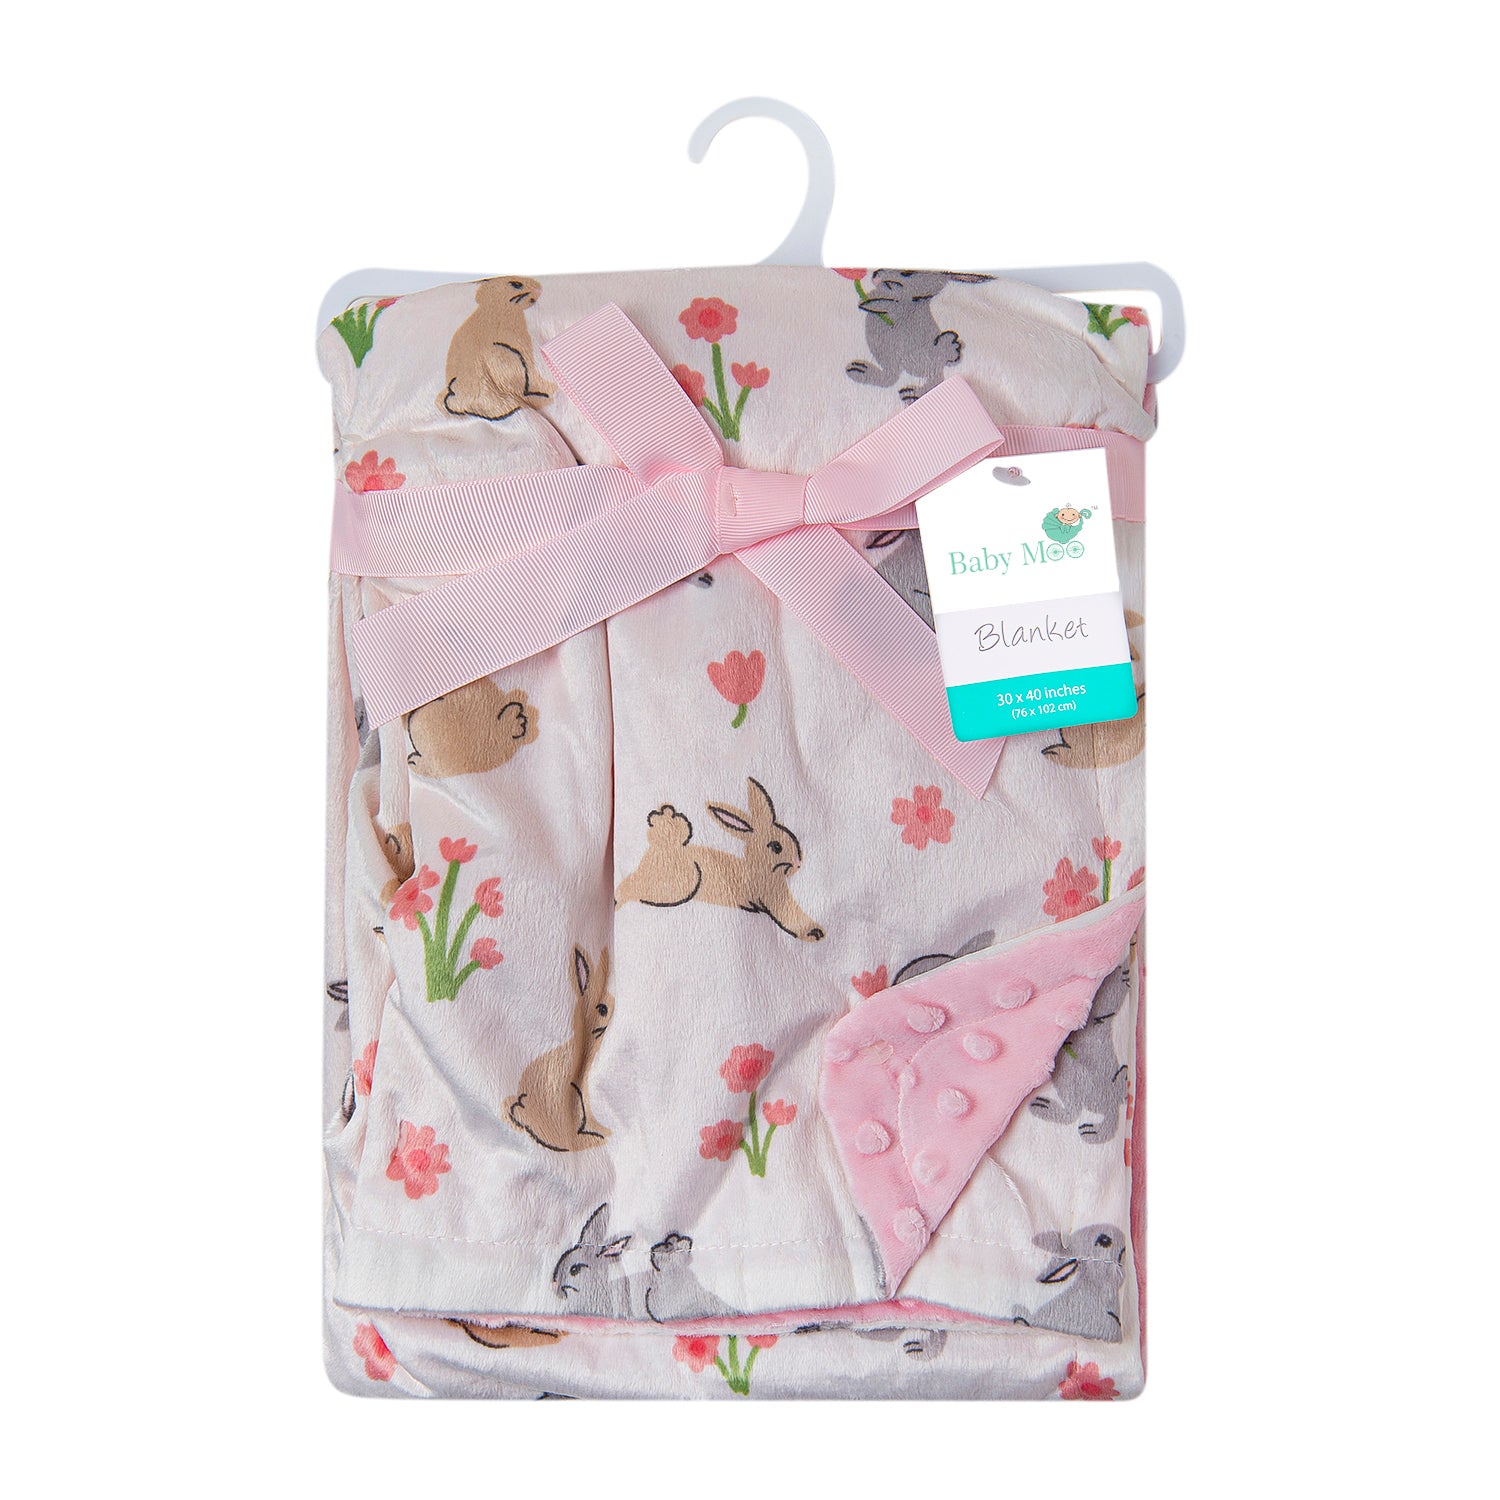 Hopping Bunnies Soft Reversible Bubble Blanket Pink - Baby Moo